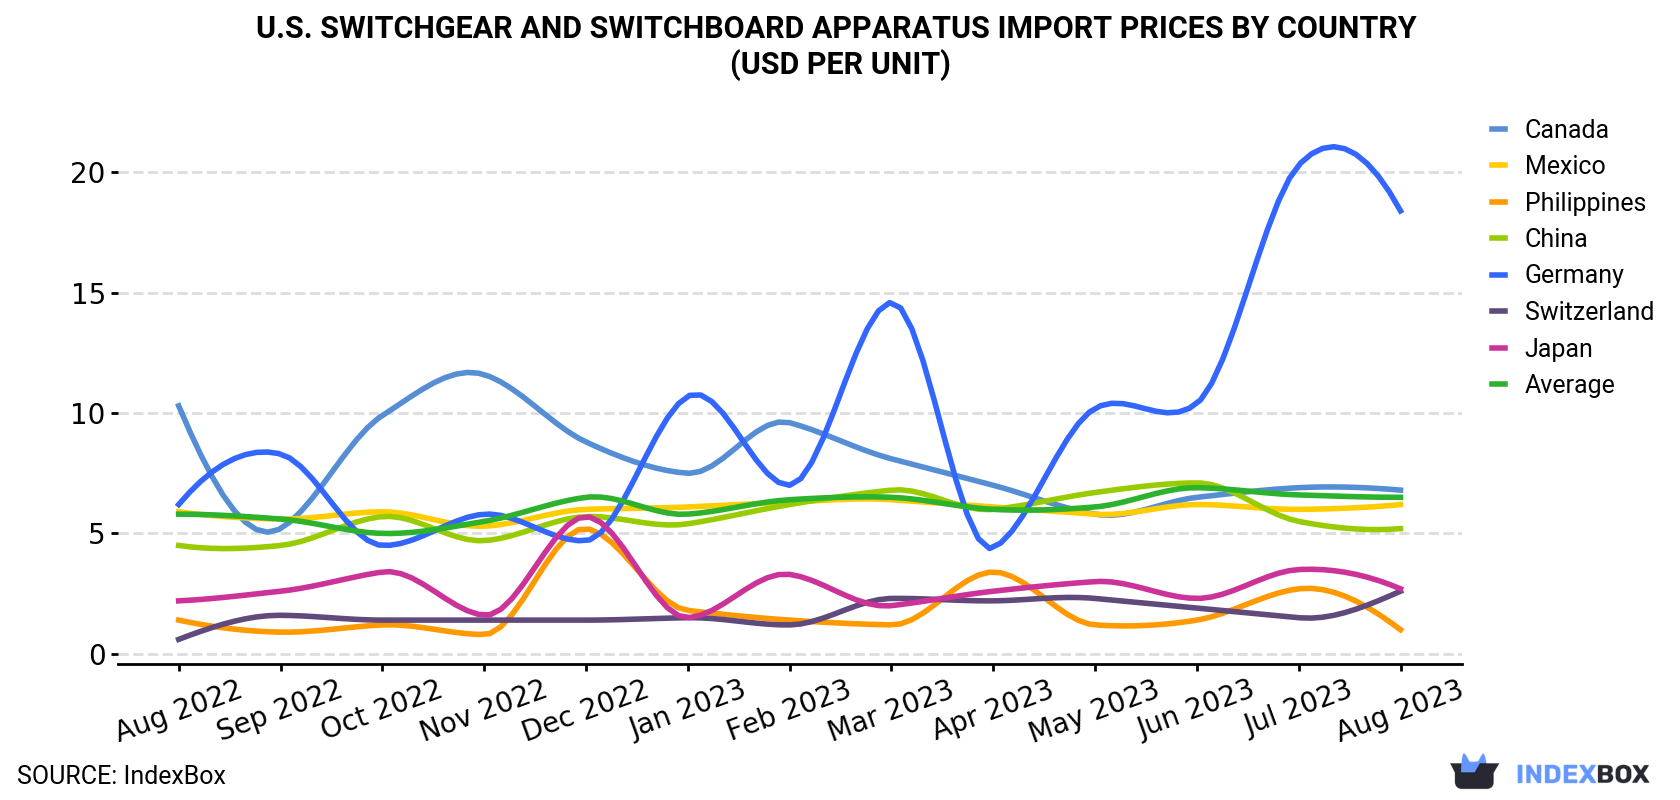 U.S. Switchgear And Switchboard Apparatus Import Prices By Country (USD Per Unit)